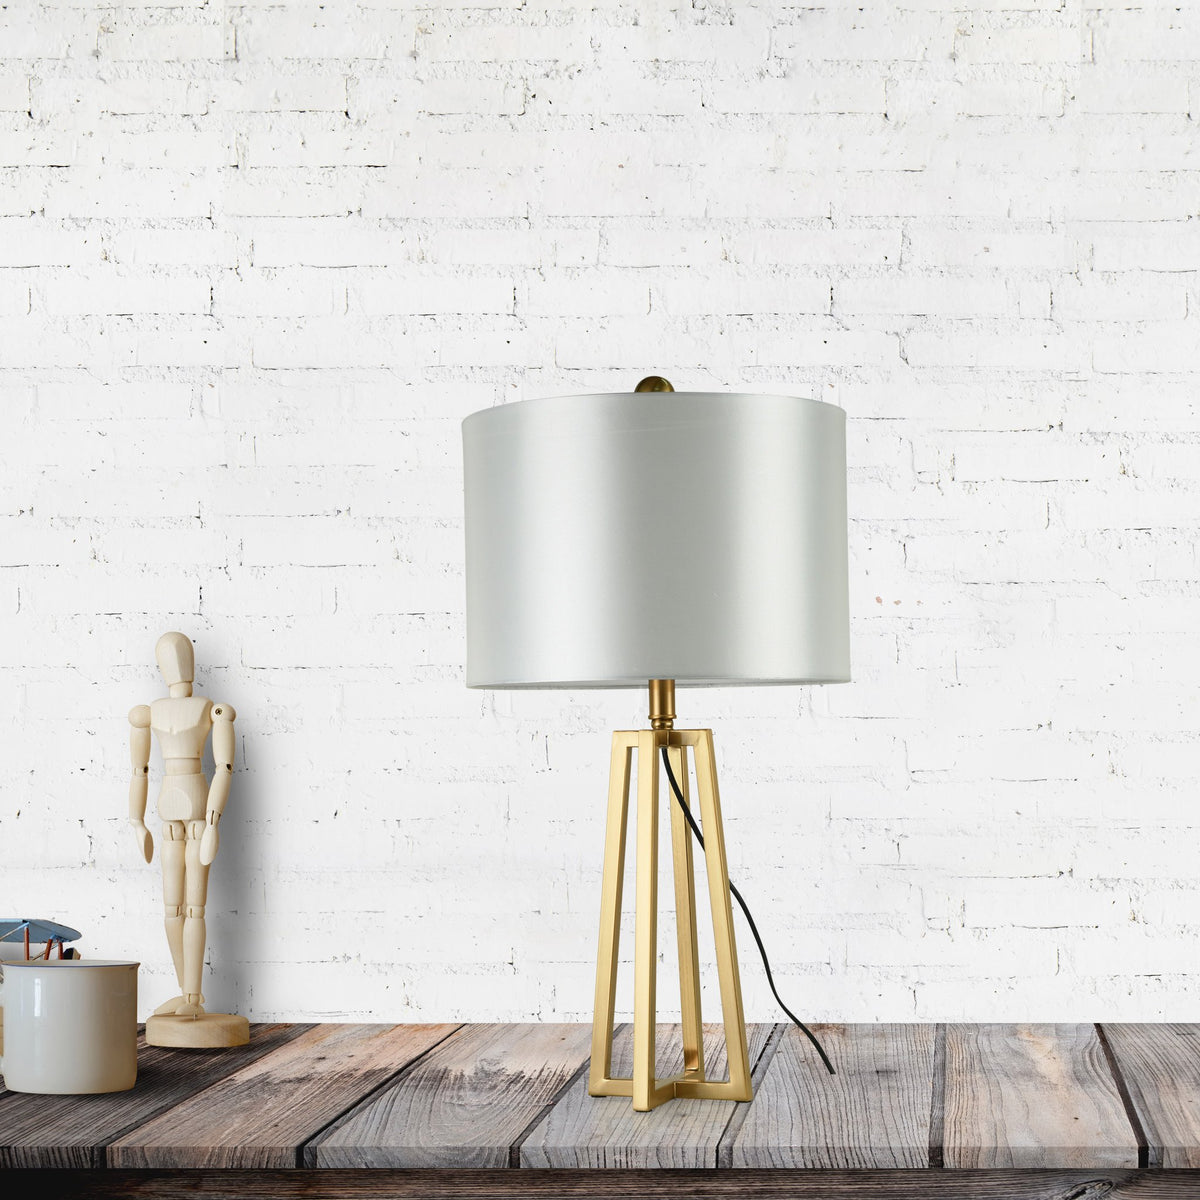 Buy Fab Table Lamp Online